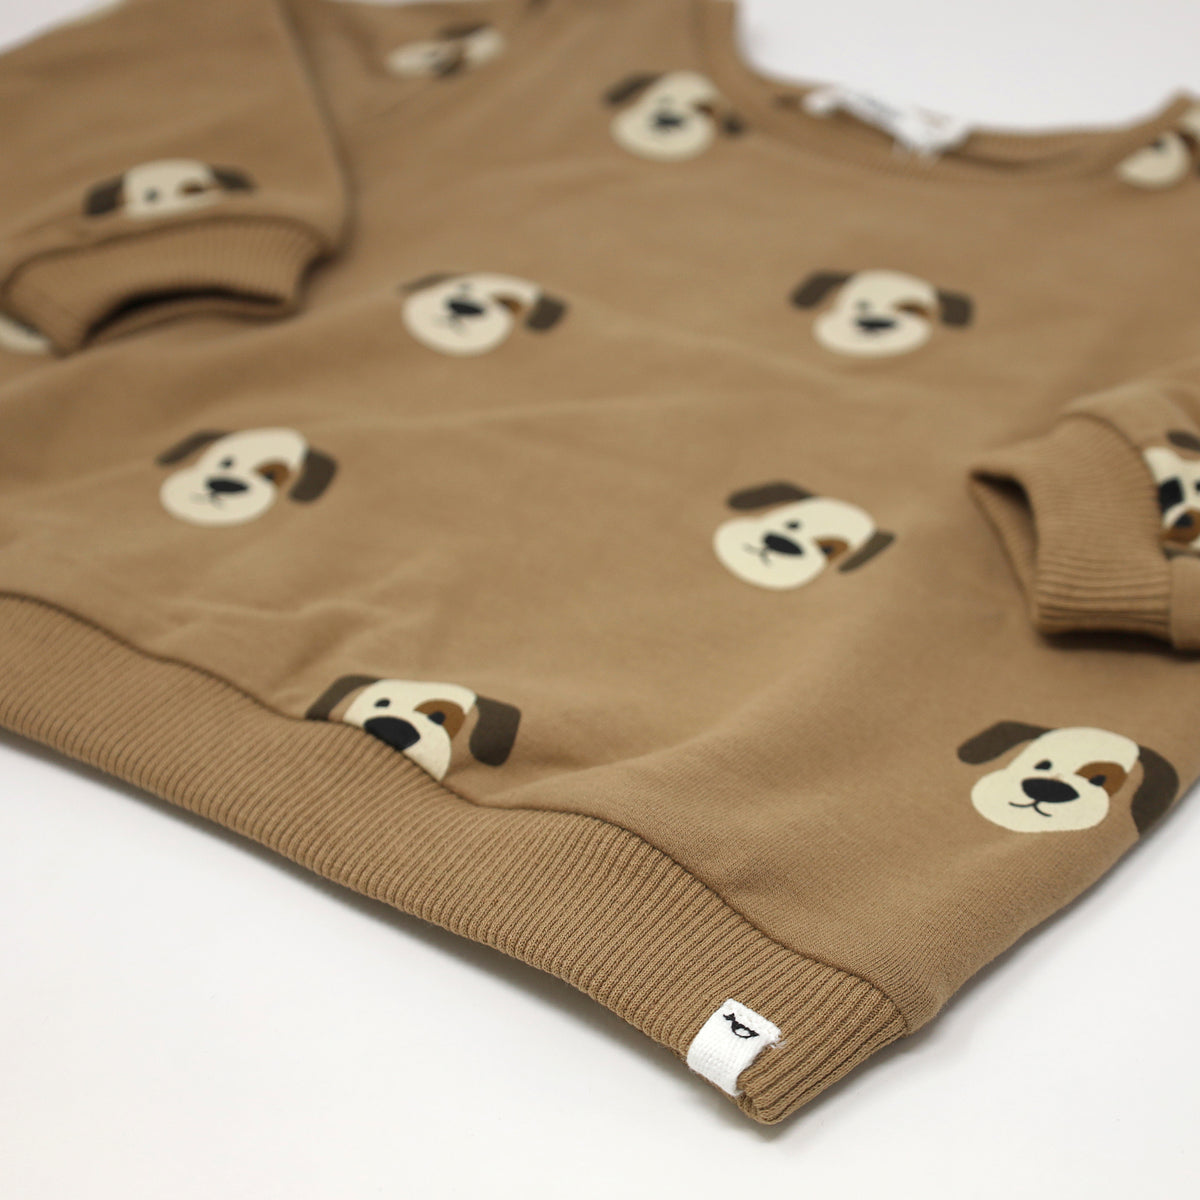 oh baby! Brooklyn Boxy Sweatshirt with Puppy Faces Print - Caramel